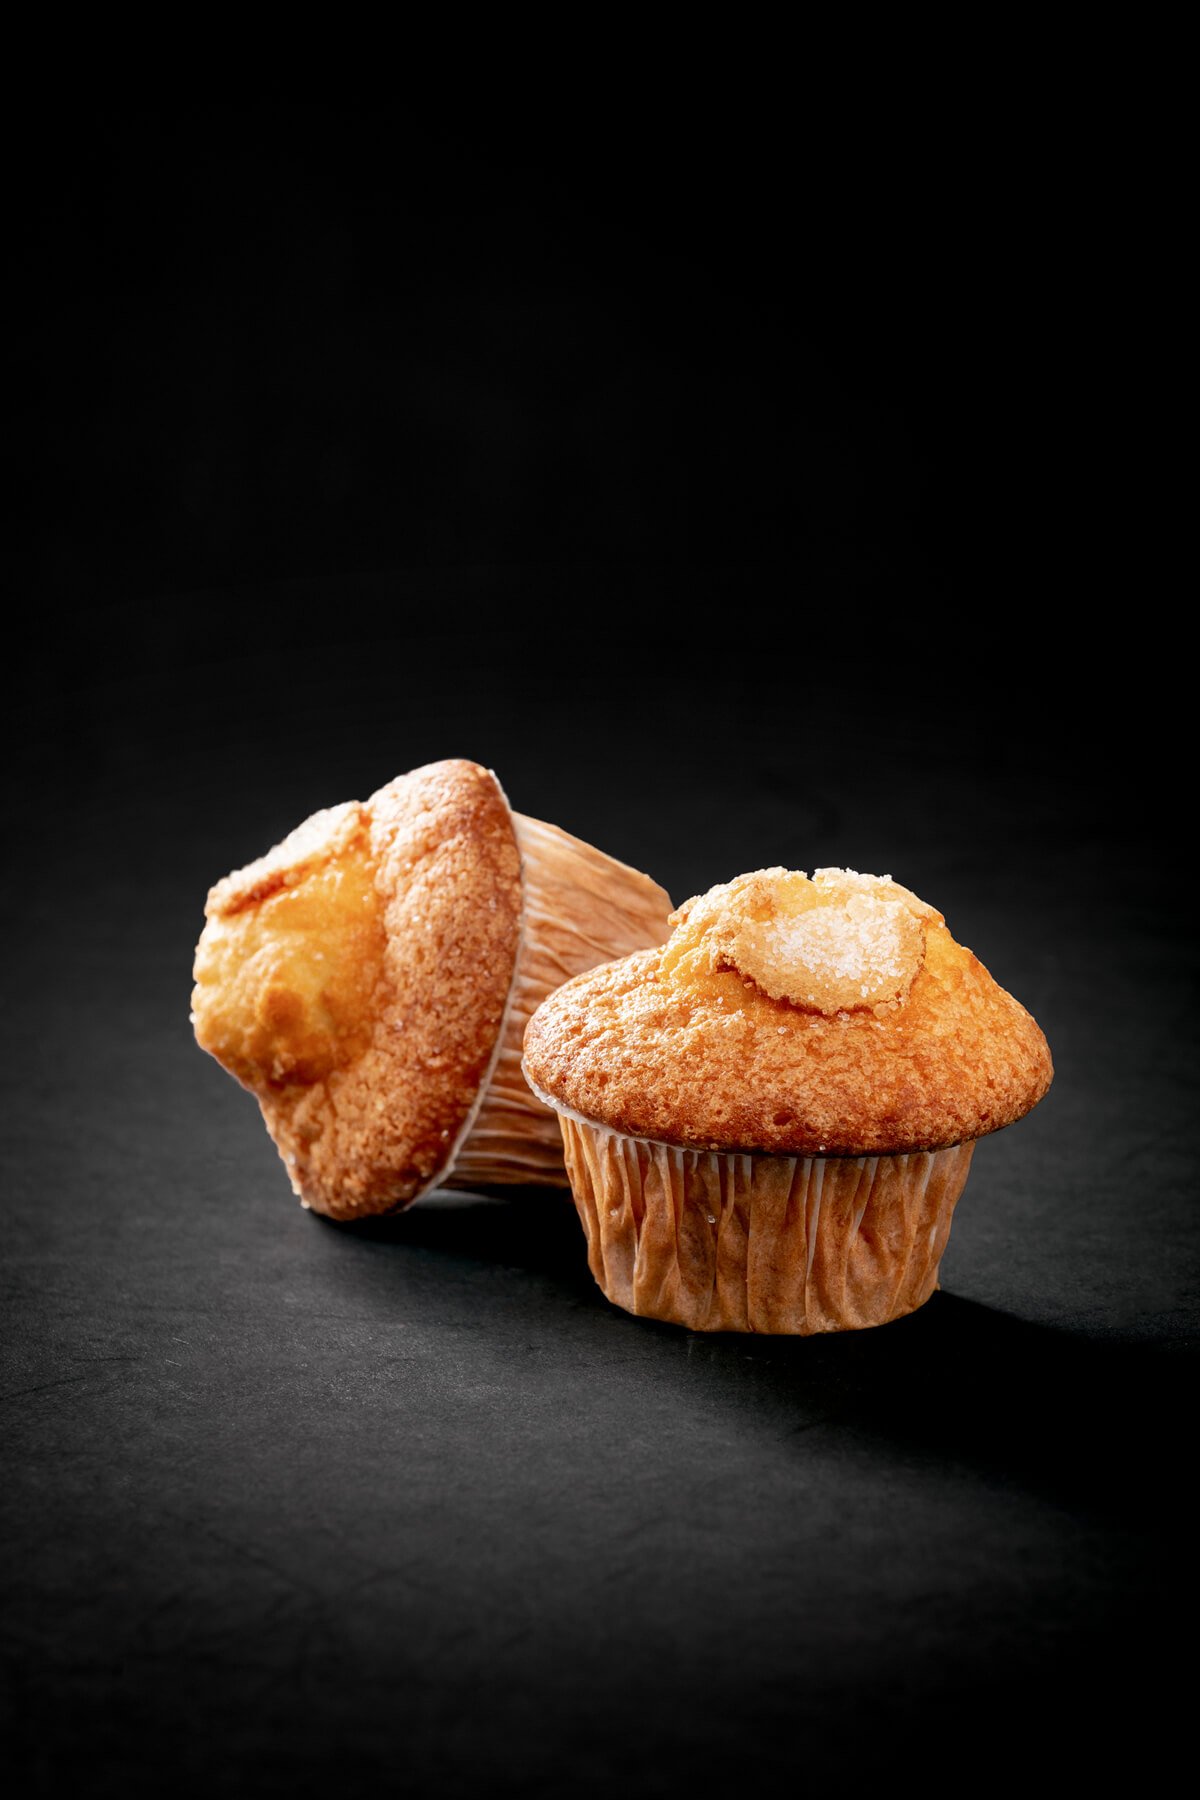 Baked to perfection- Monbake product shots by MuruStudios advertising photographers in Madrid Barcelona Pamplona Spain 42.jpg